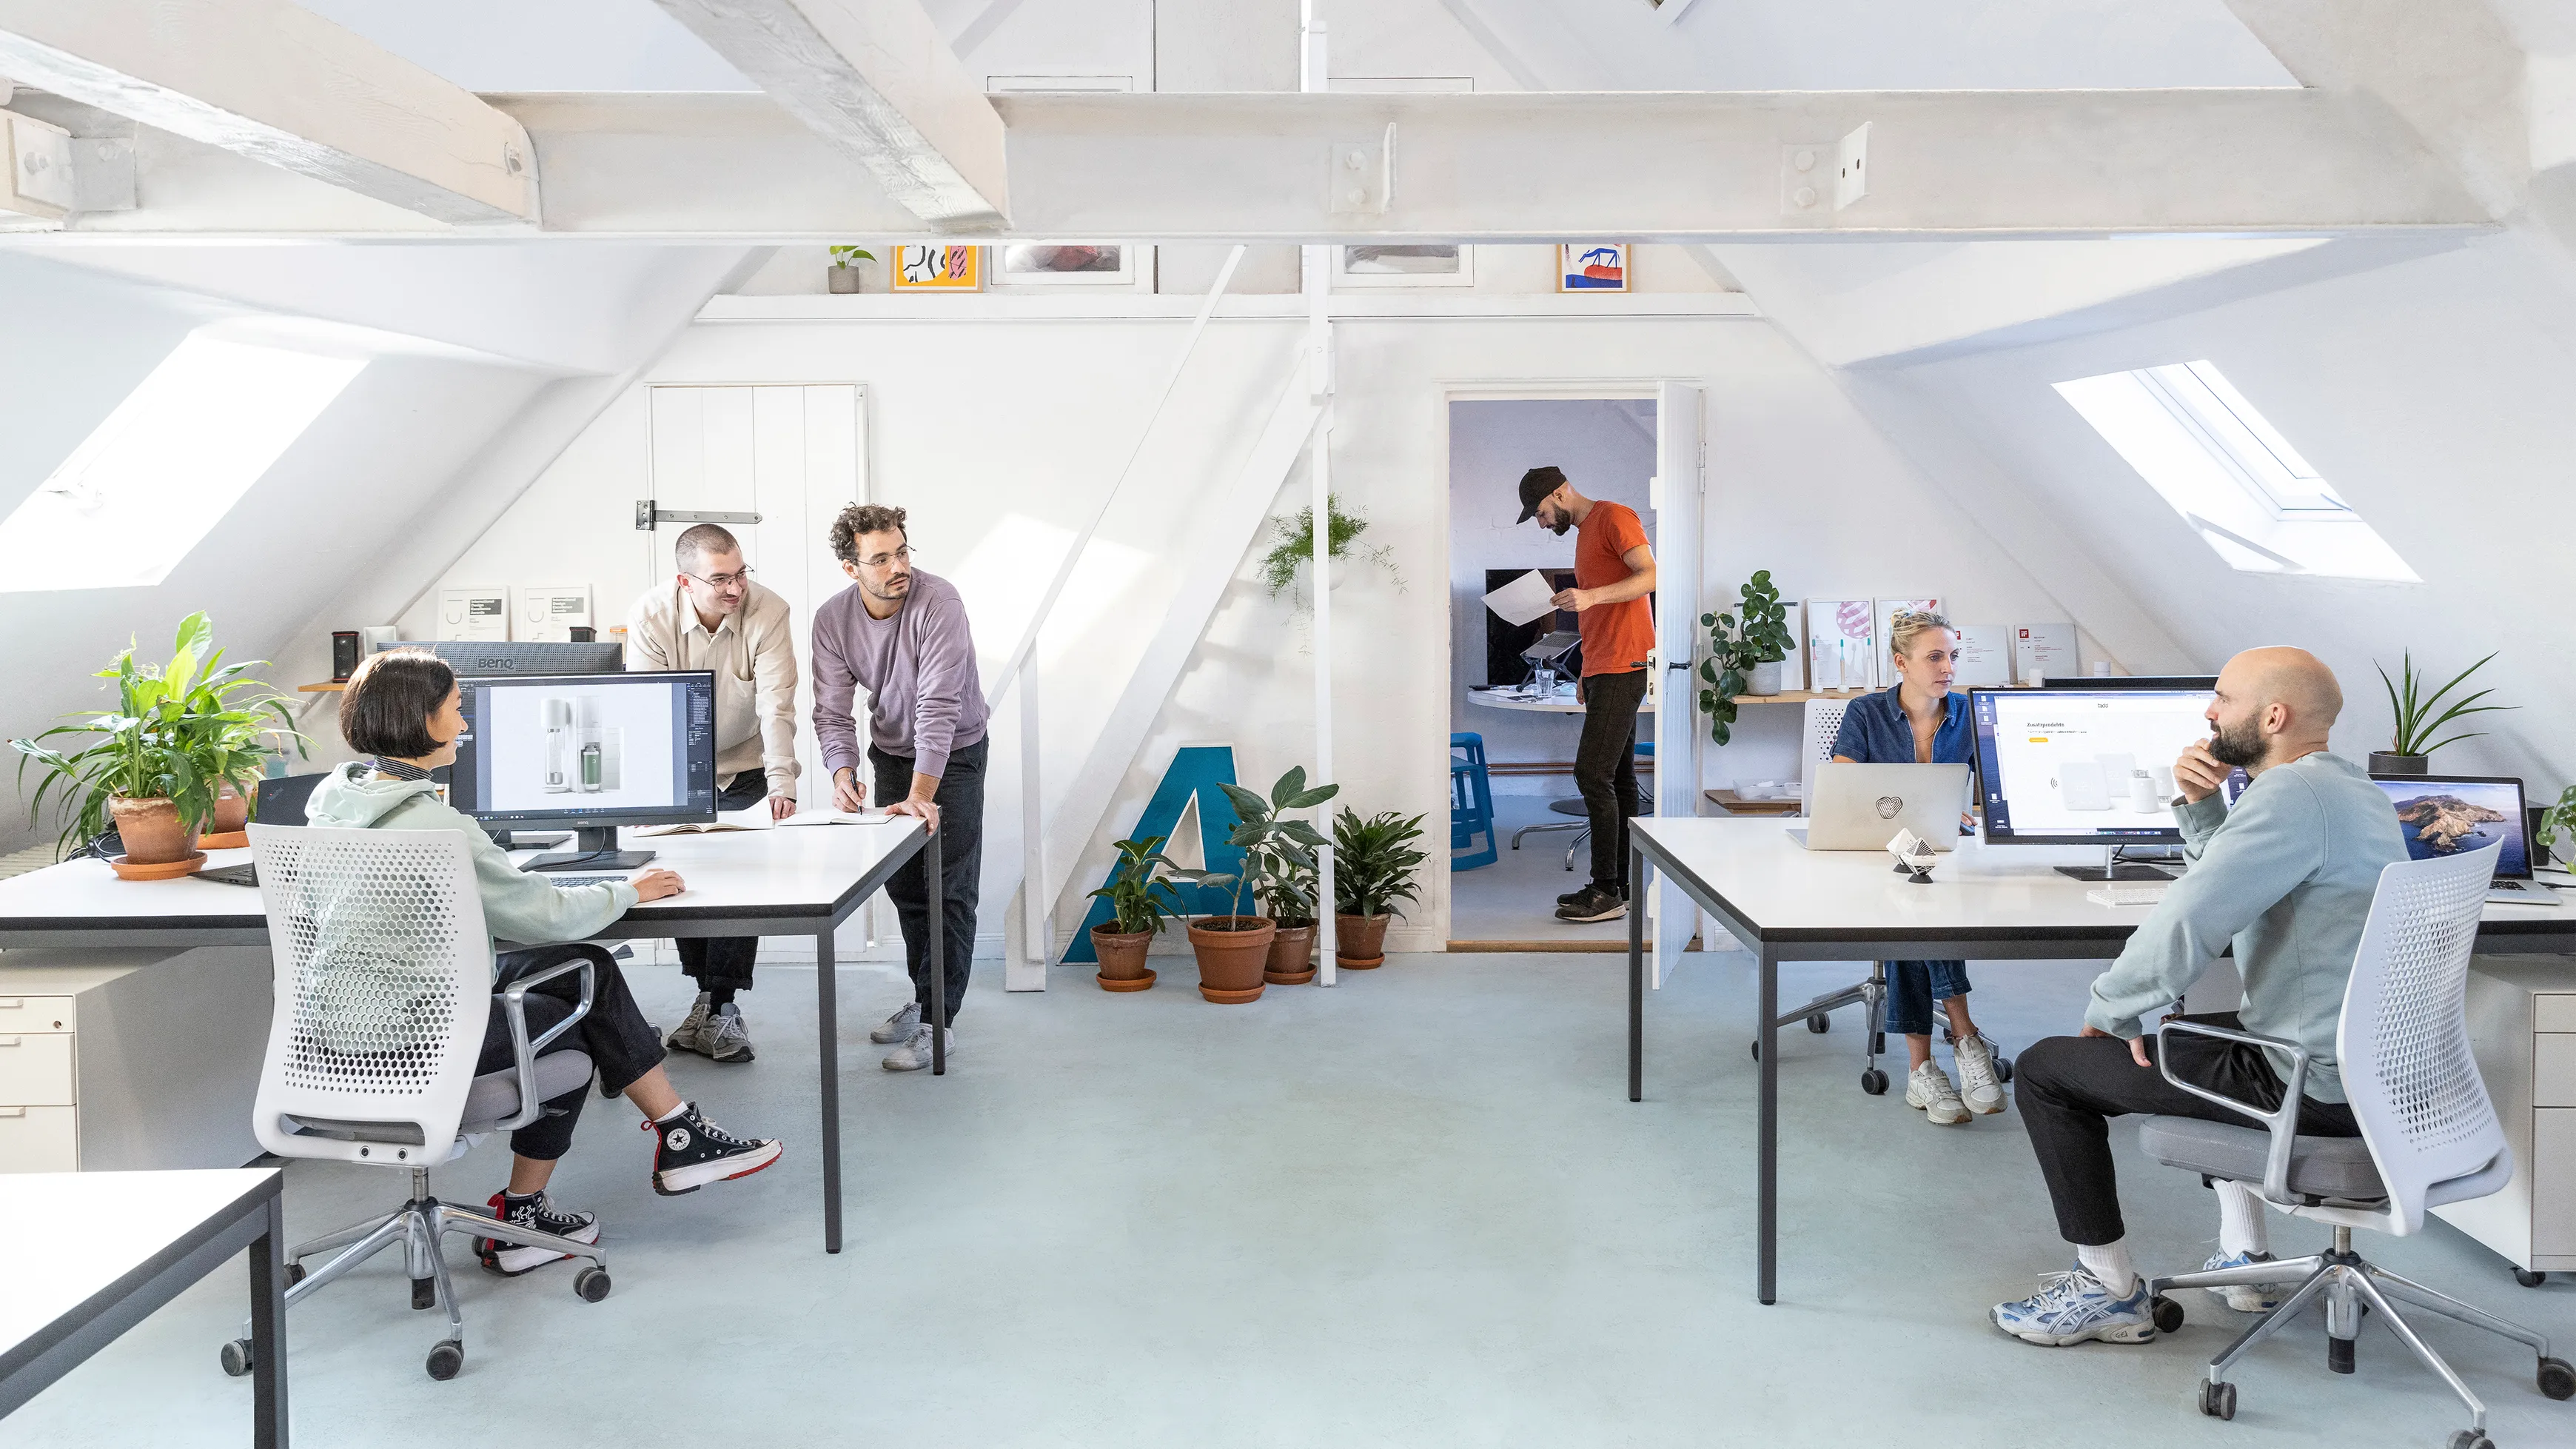 A view inside a sunny industrial design studio with its employees